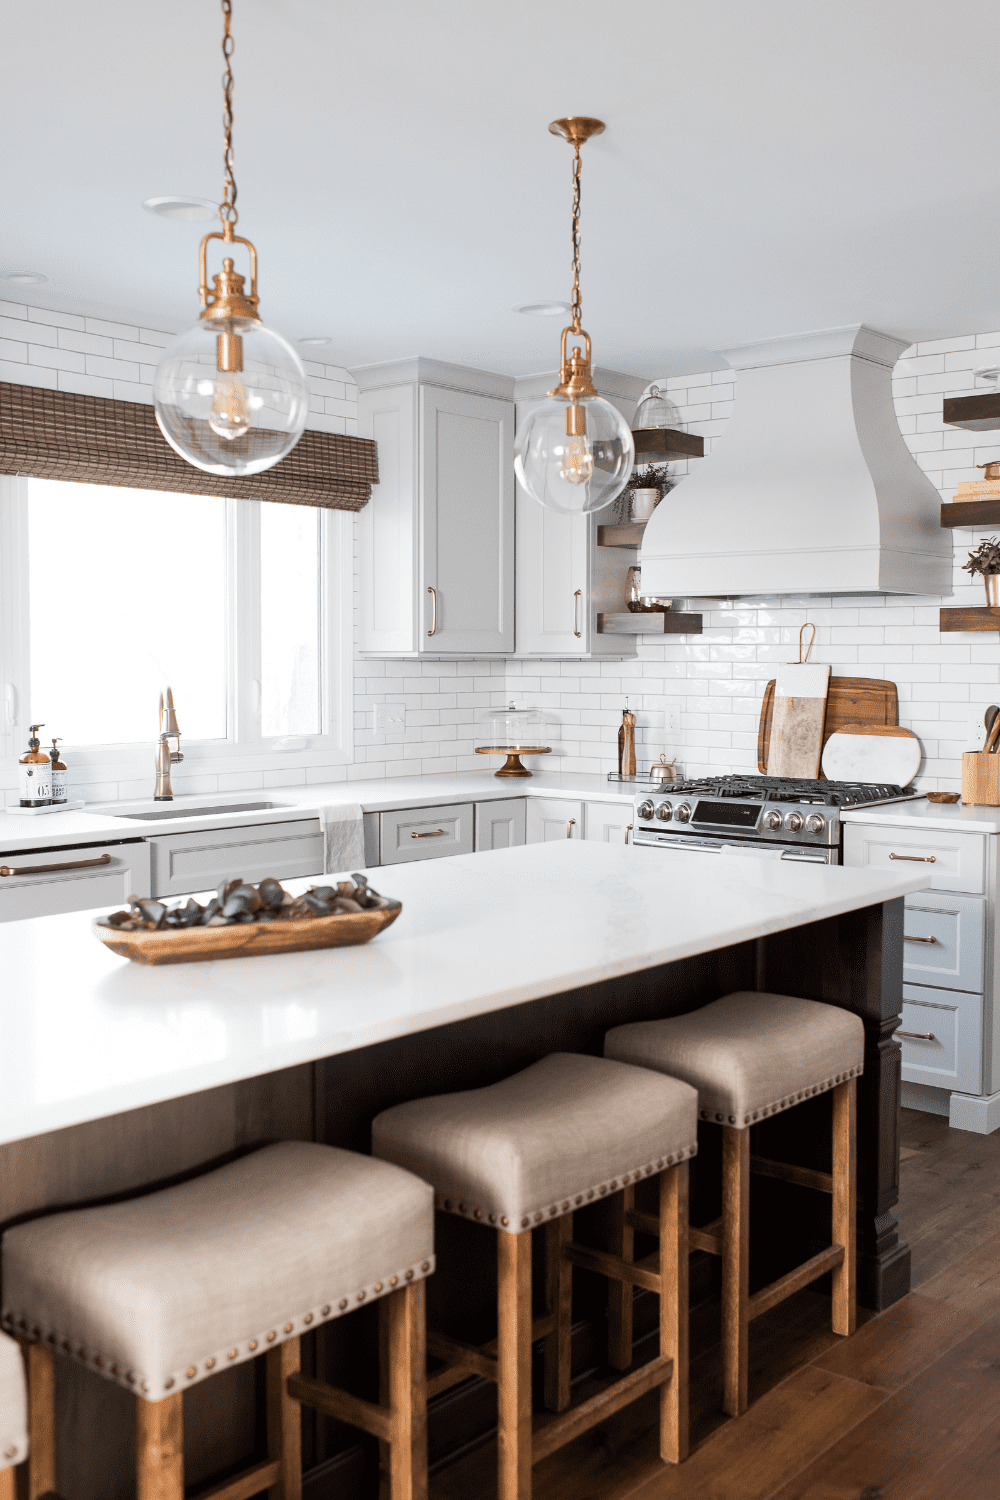 Nicholas Design Build | A neutral kitchen with a large island and stools.